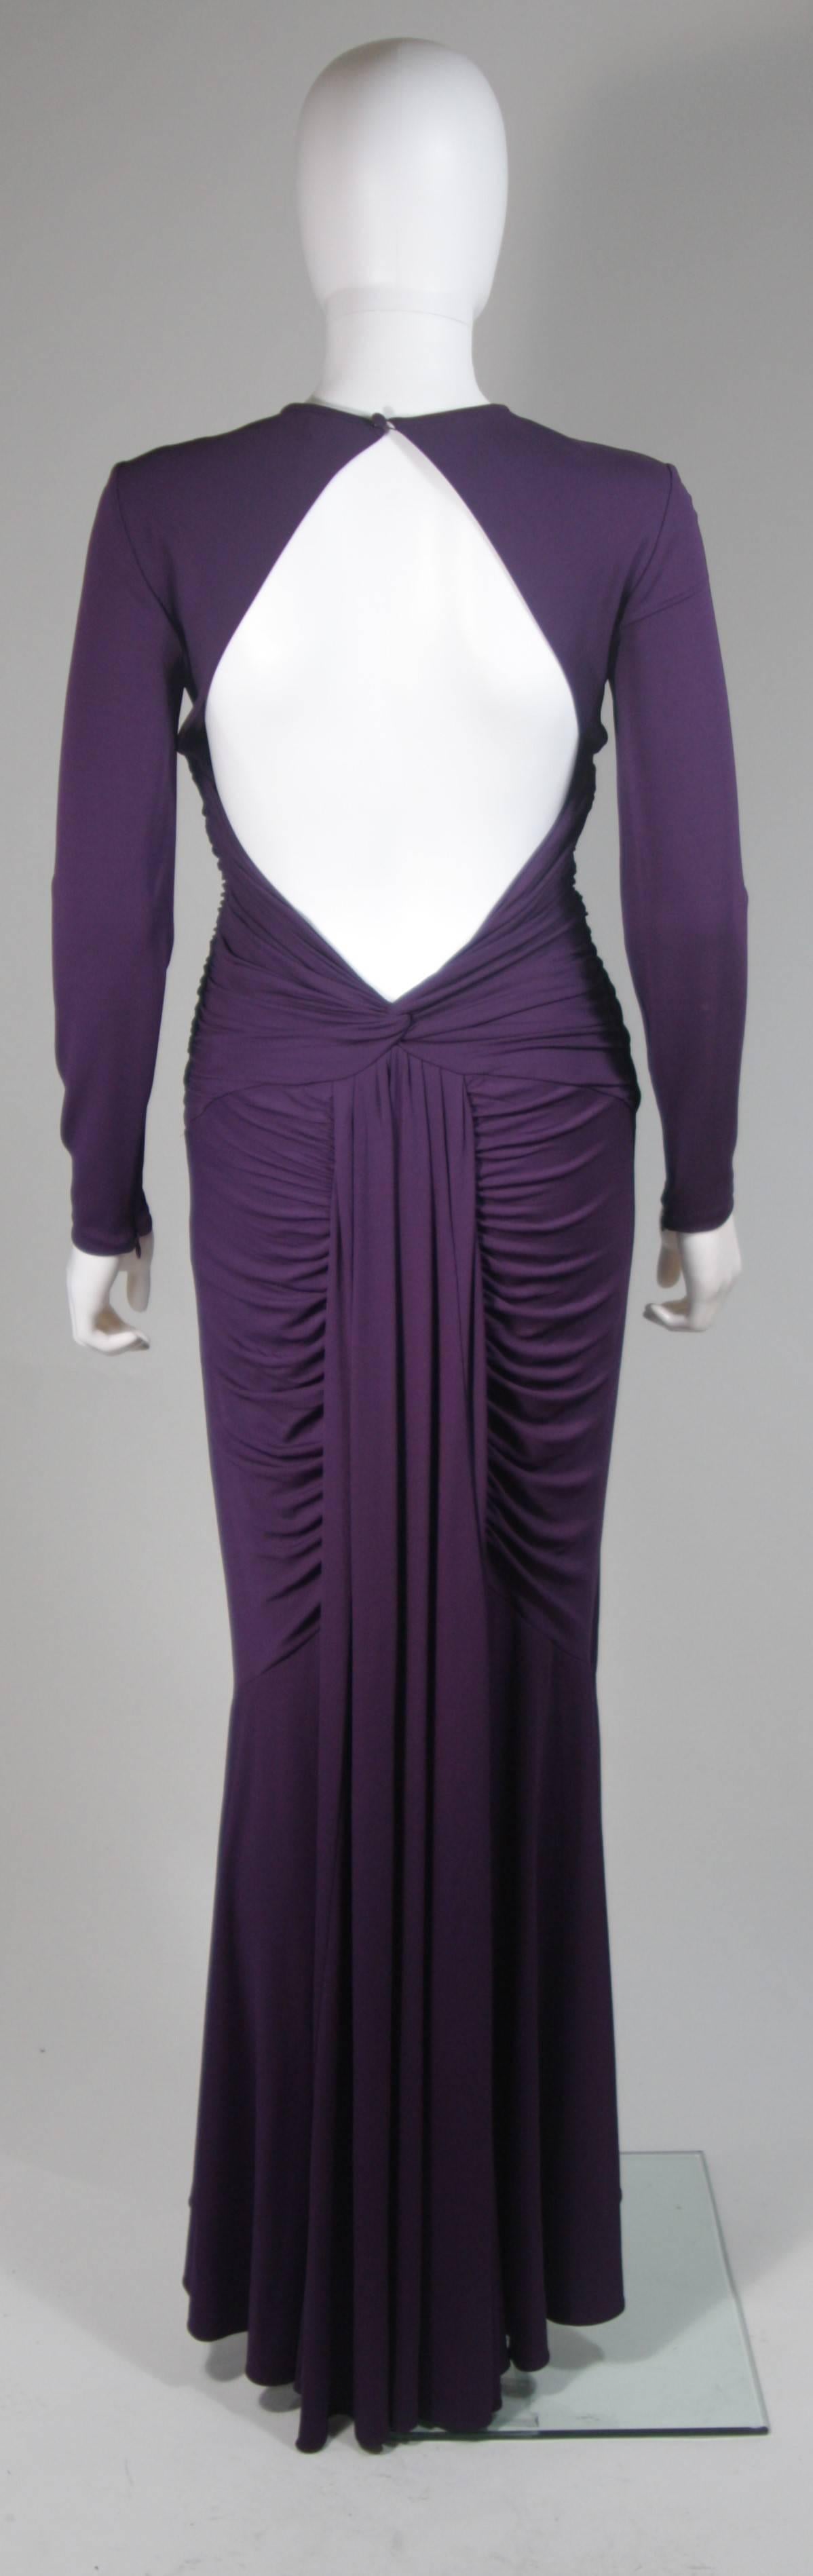 Women's MICHAEL KORS Purple Stretch Jersey Draped Gown with Open Back Size 10 For Sale